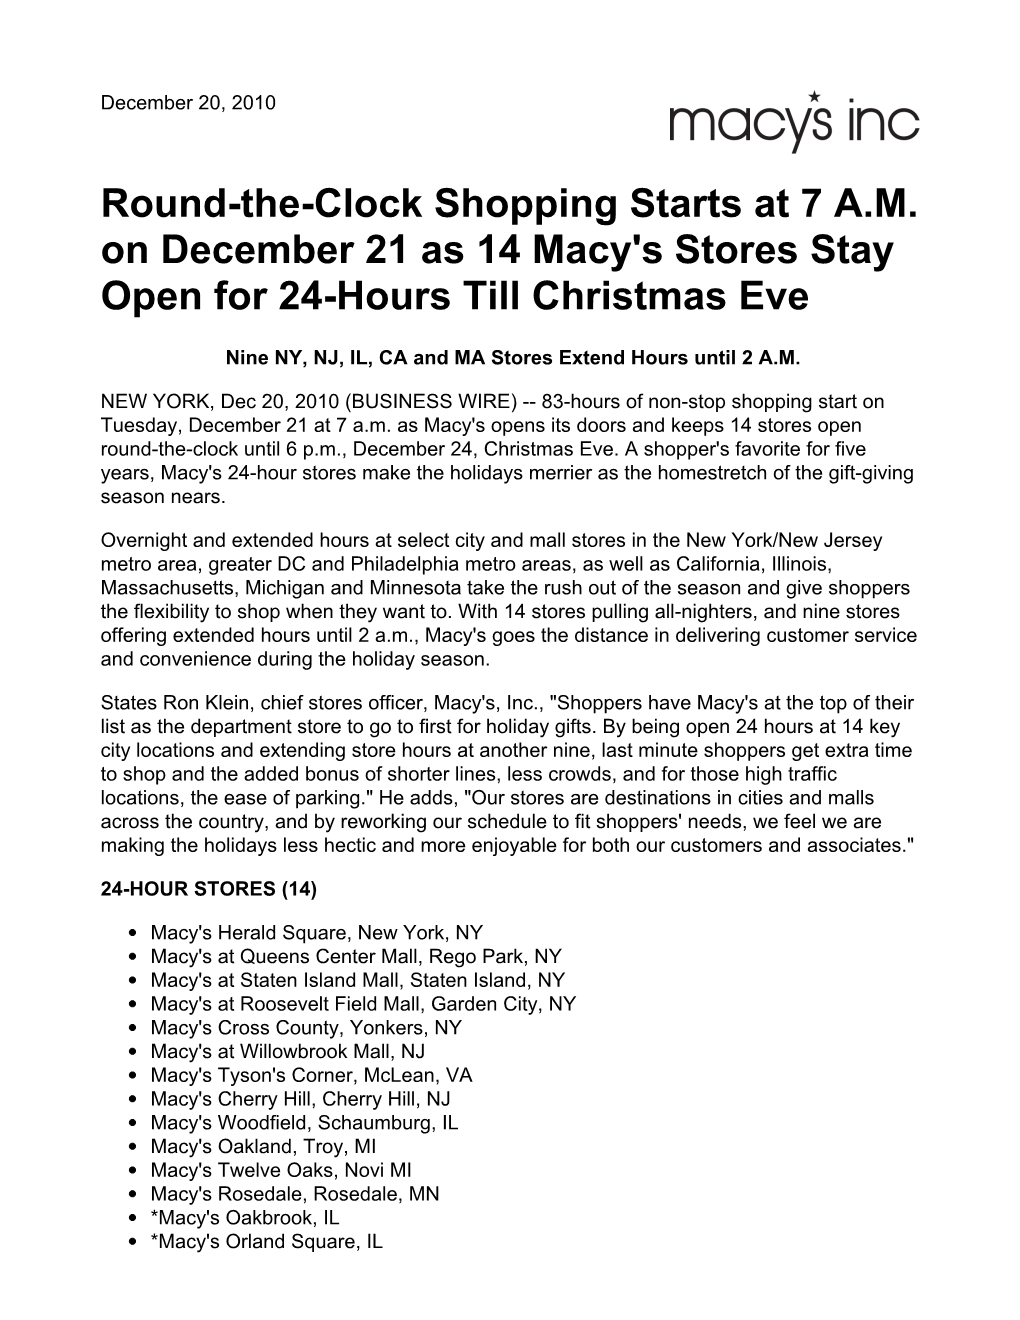 Round-The-Clock Shopping Starts at 7 A.M. on December 21 As 14 Macy's Stores Stay Open for 24-Hours Till Christmas Eve